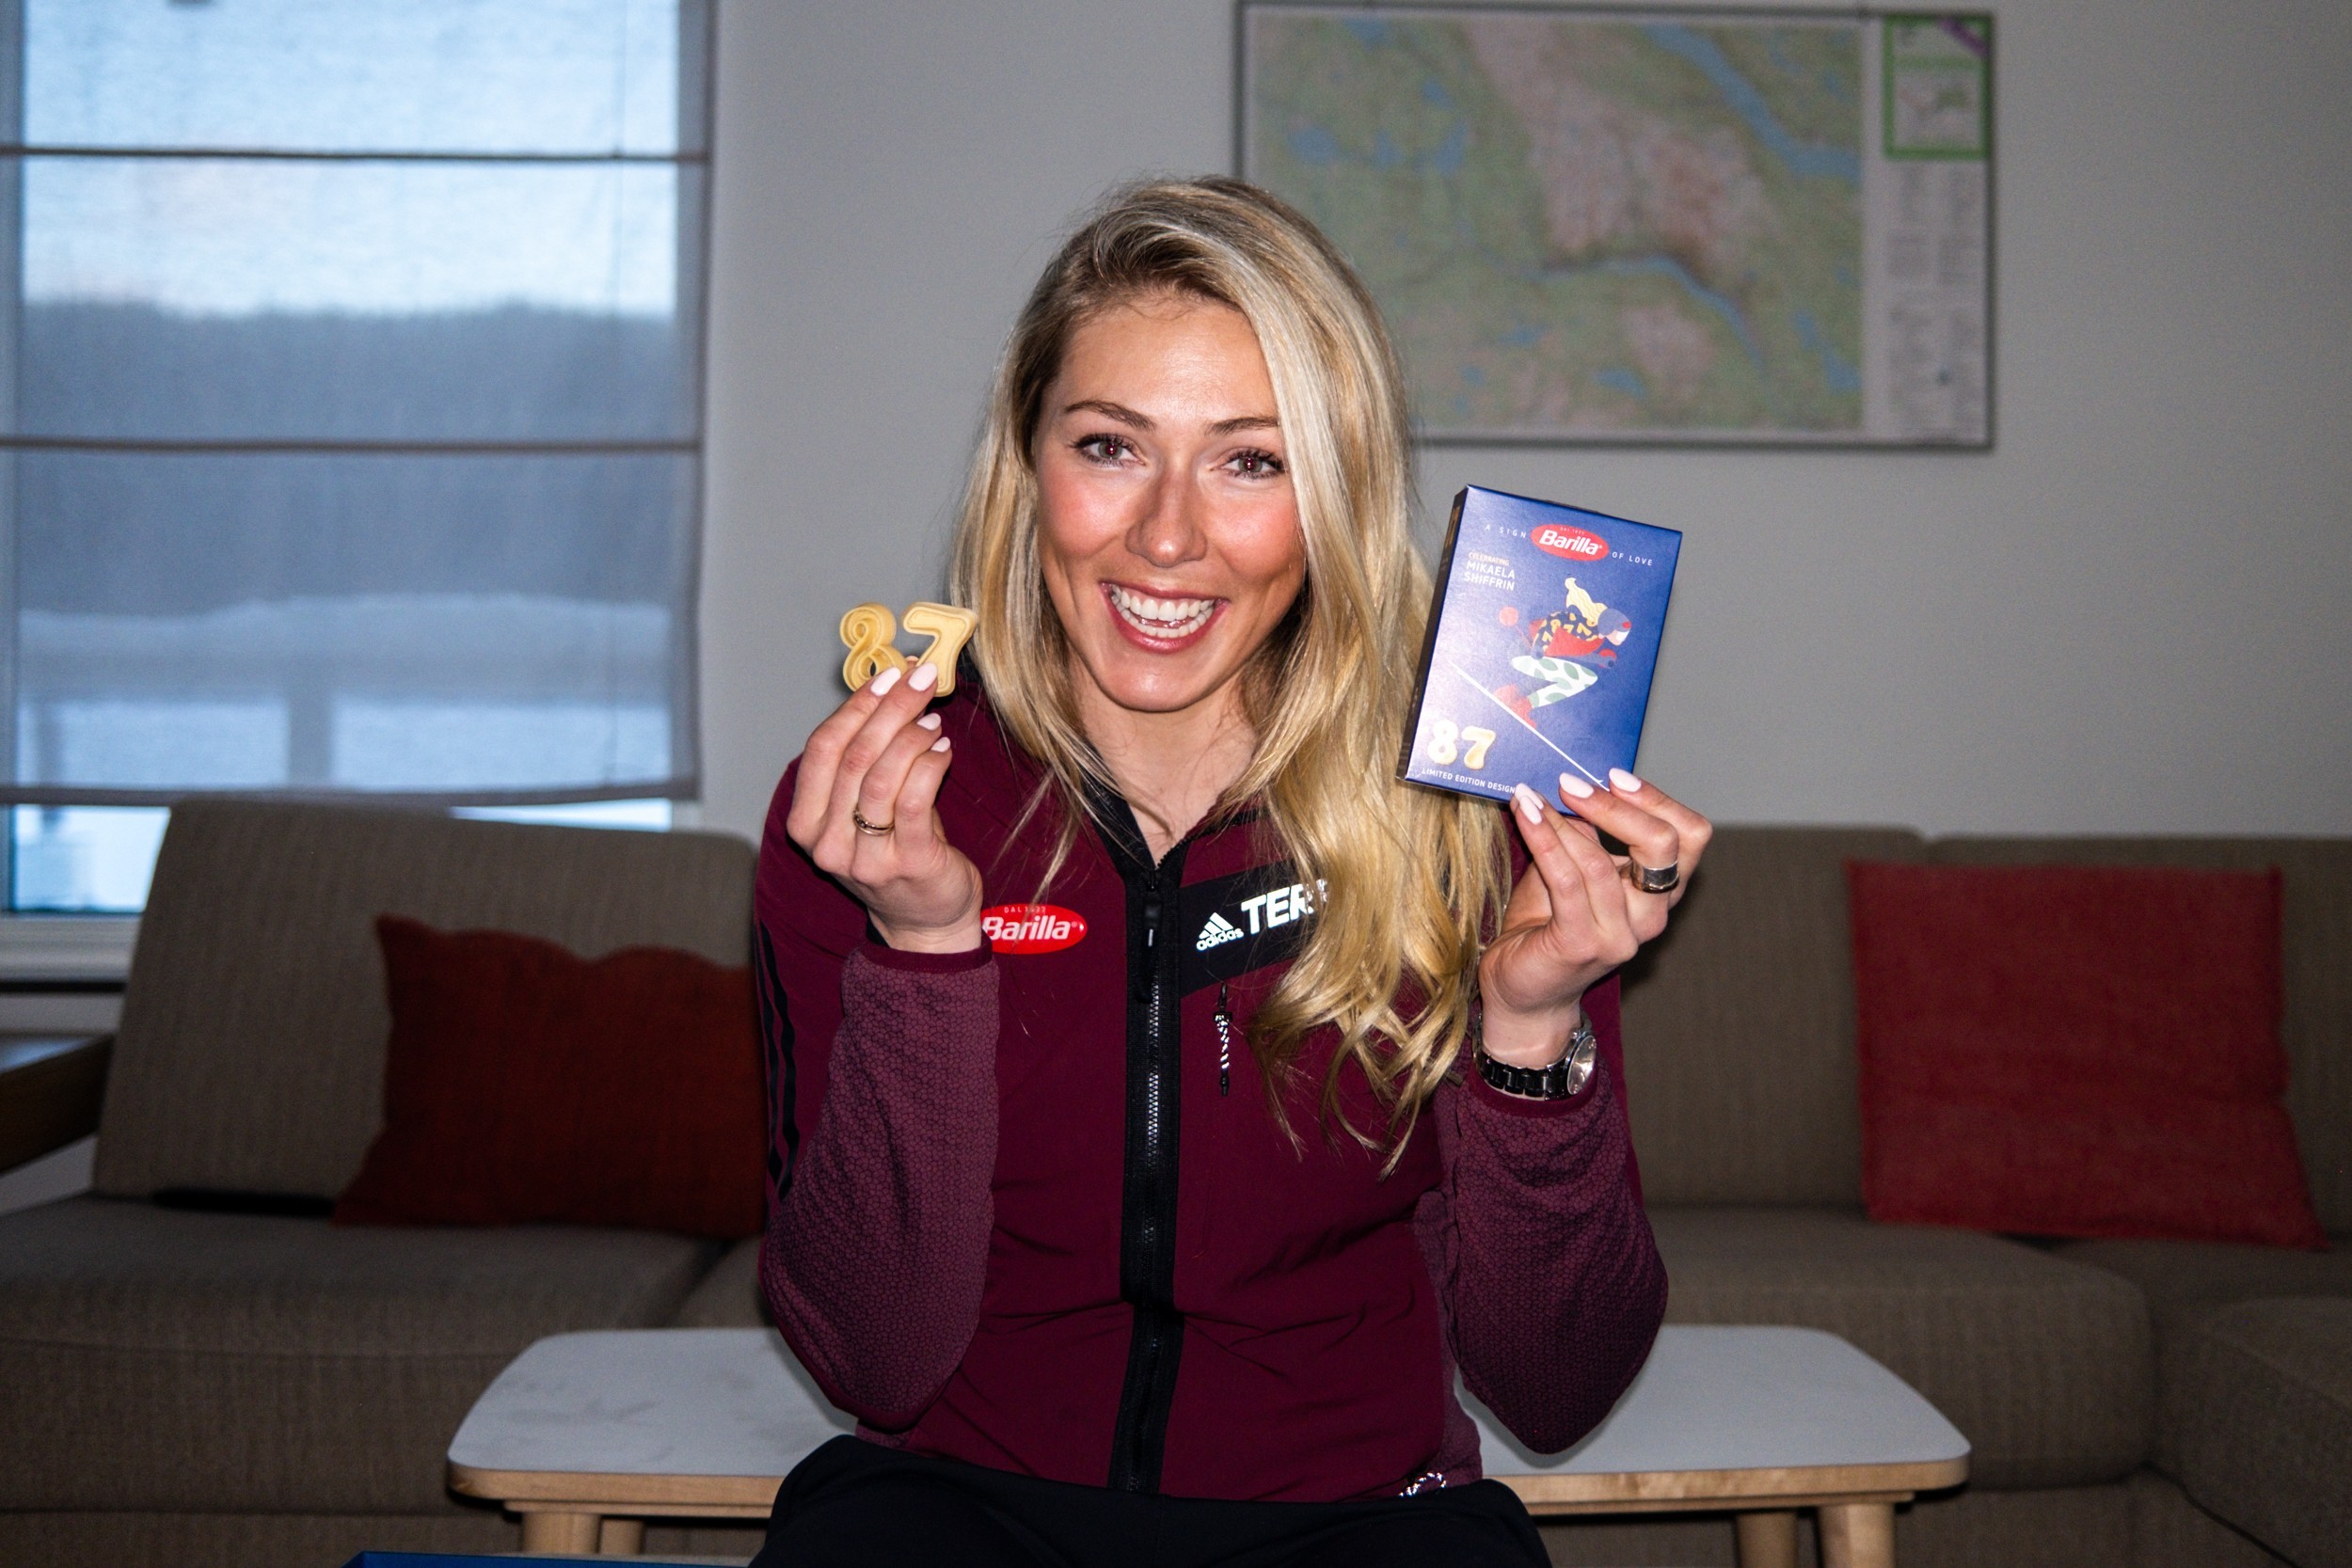 Barilla & Mikaela Shiffrin: Greatness starts with a great recipe - Pack No. 80